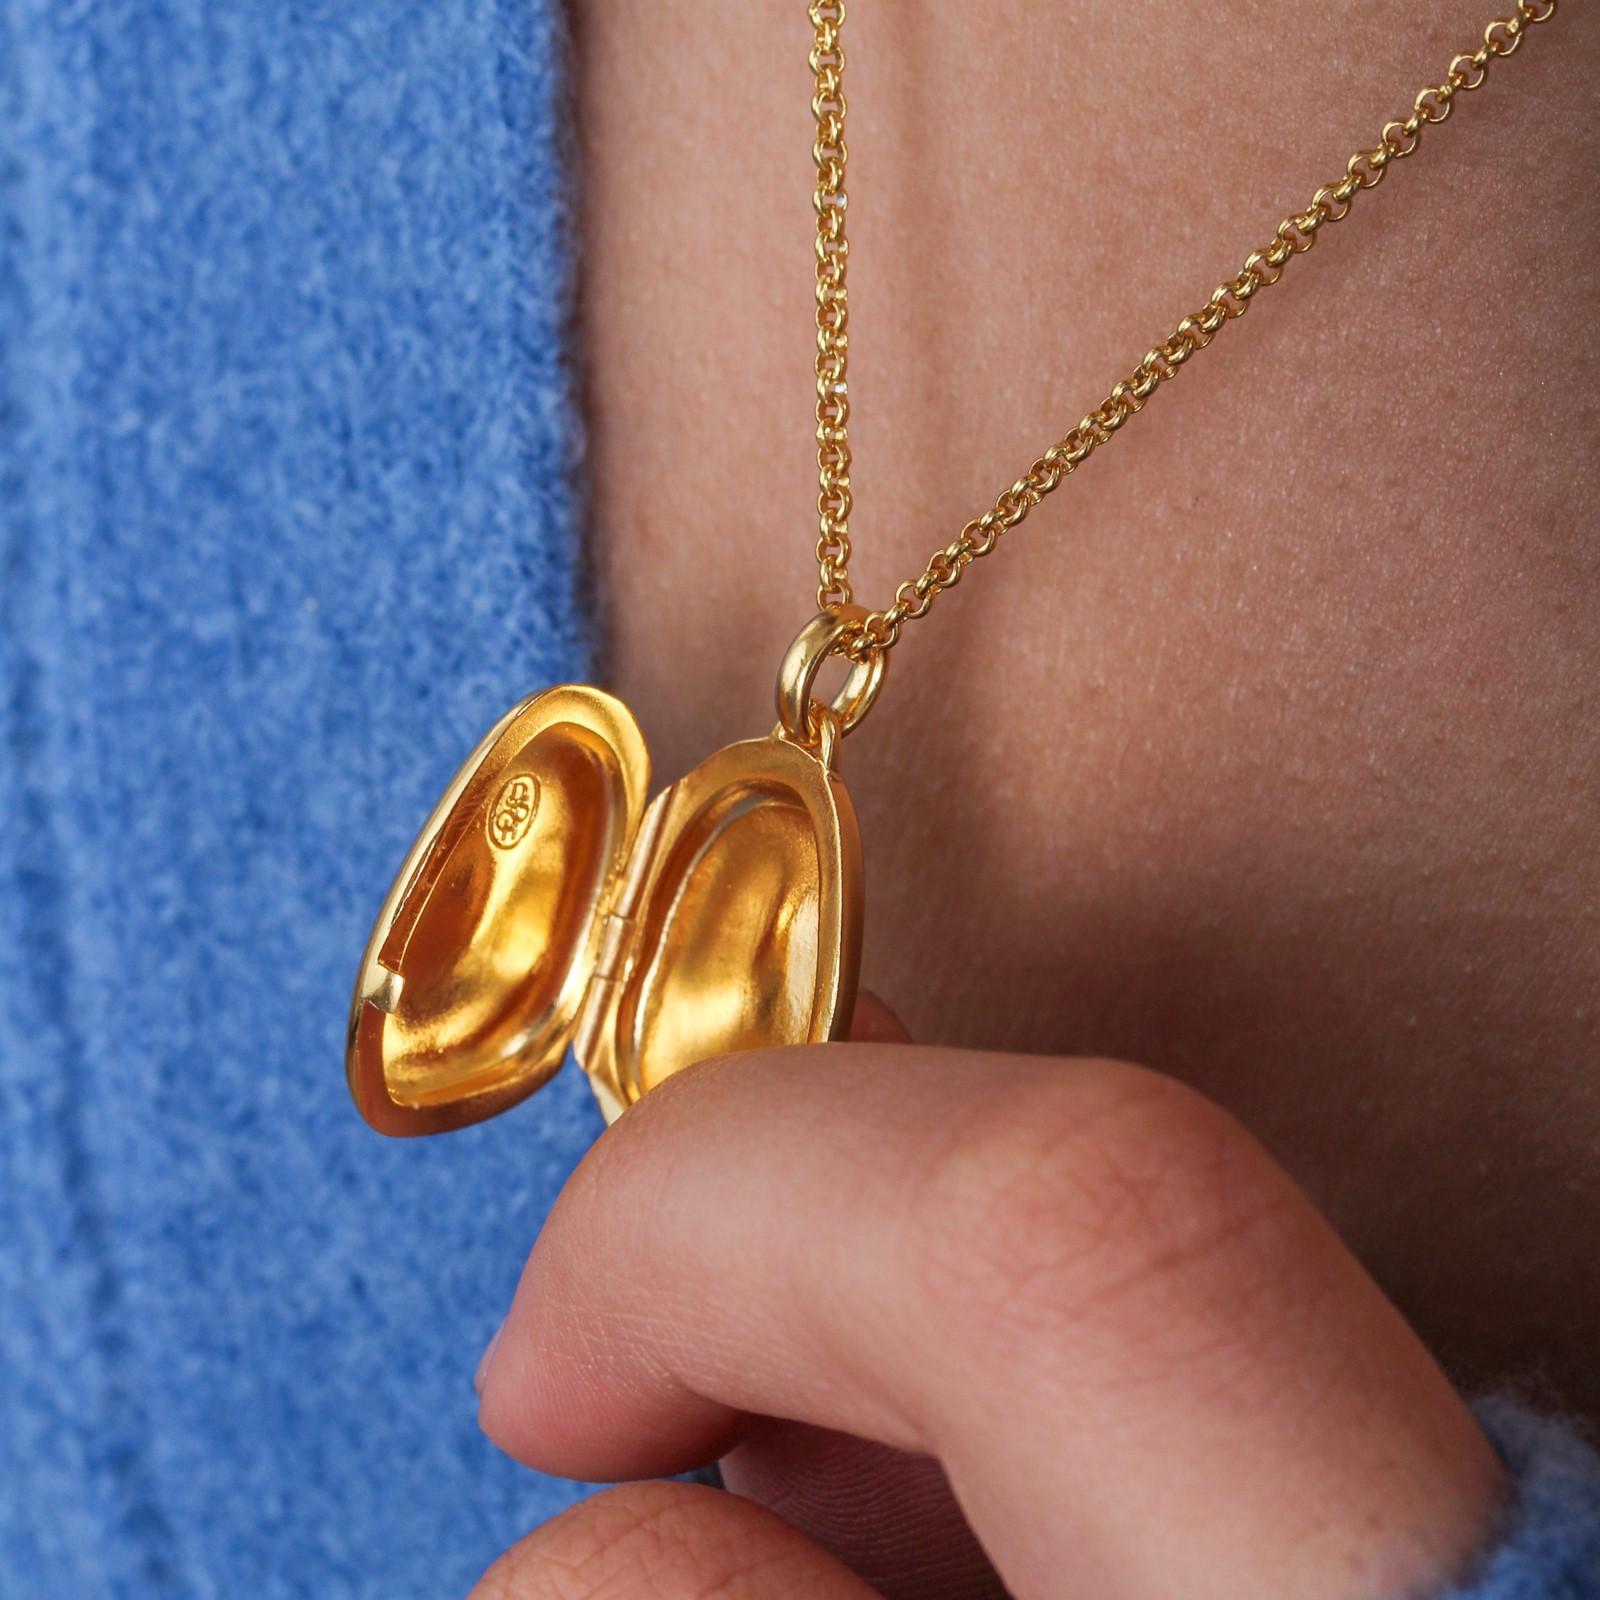 Contemporary Sculptural Pebble Locket In 18ct Gold Vermeil For Sale